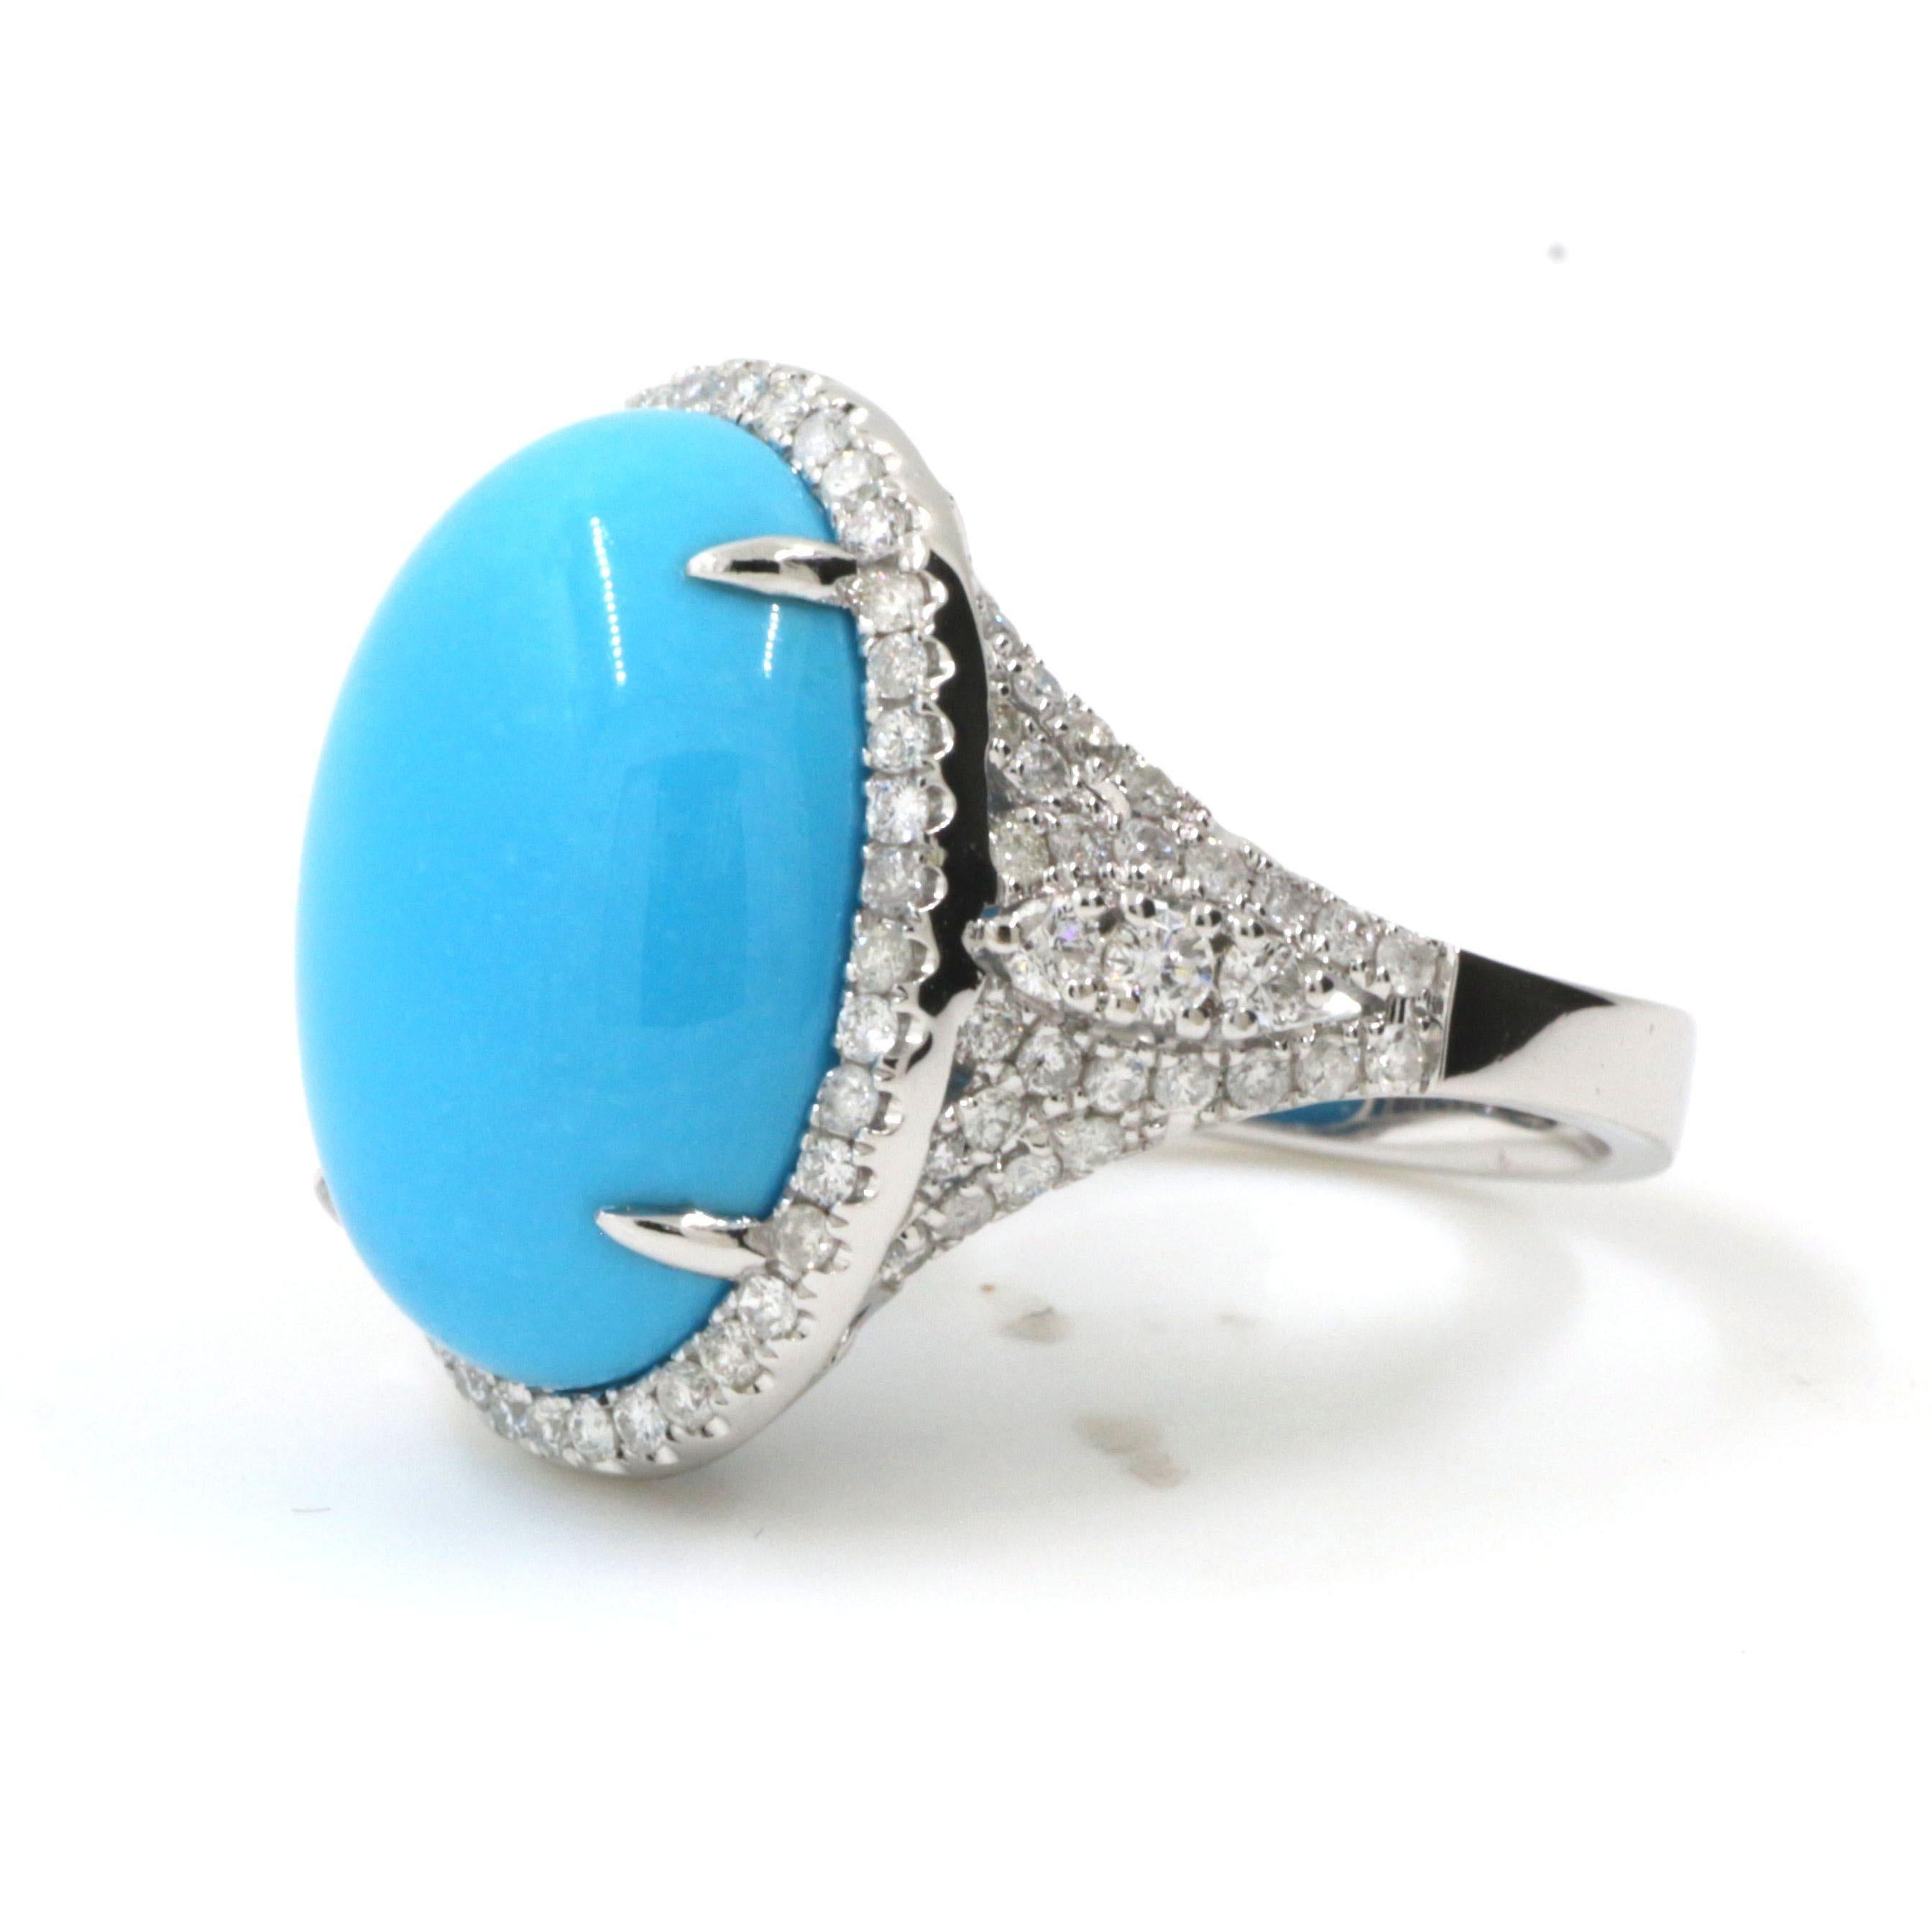 where is sleeping beauty turquoise mined